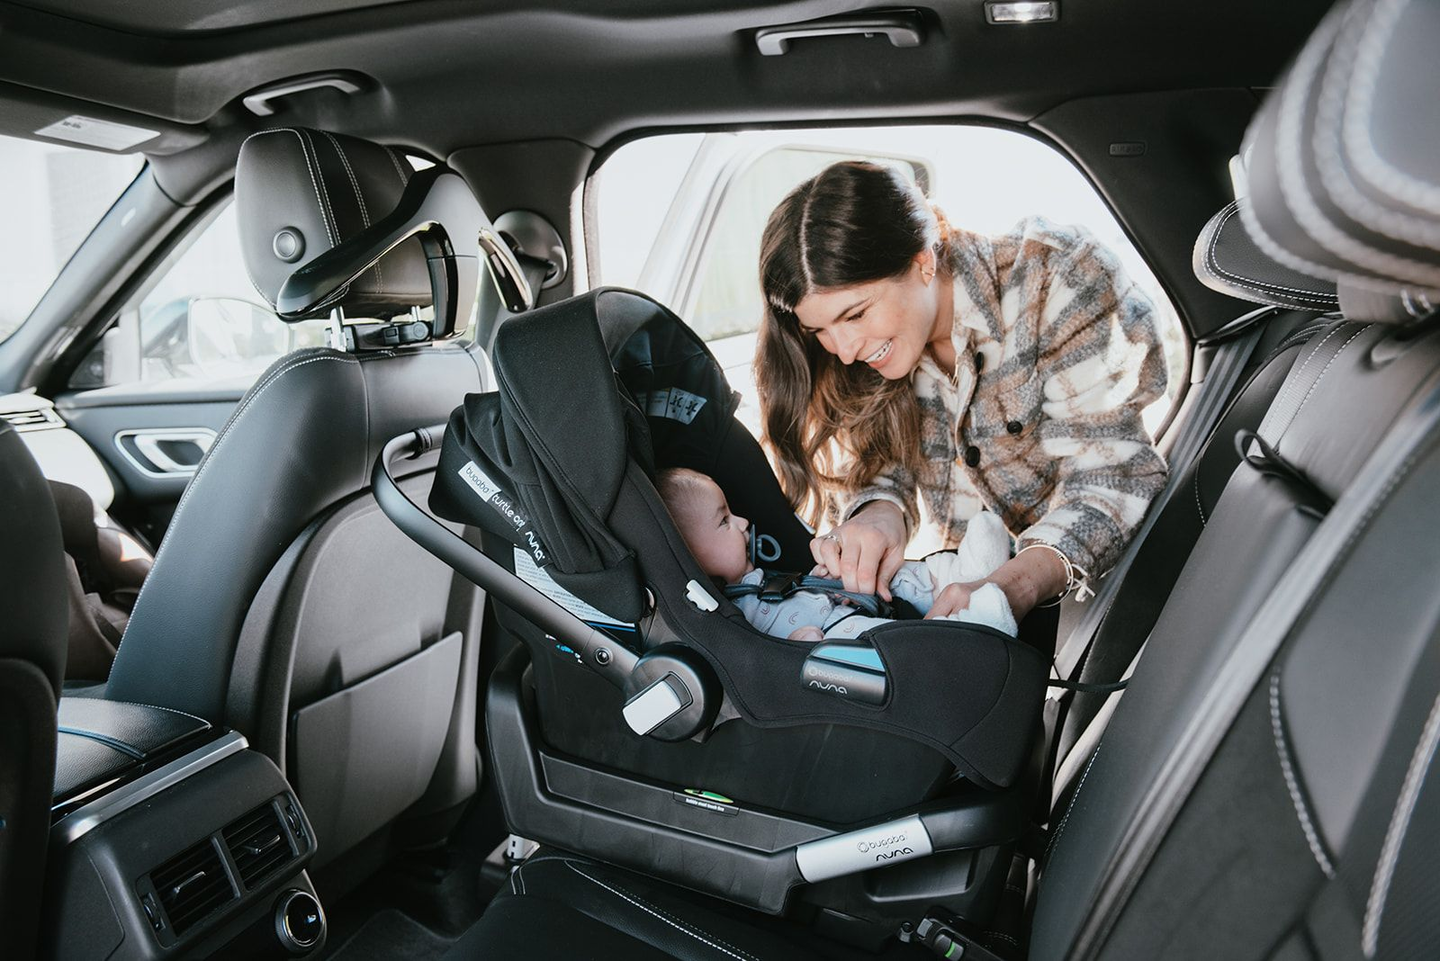 How to Remove Stains from Car Seats: Quick and Easy Guide By YMF